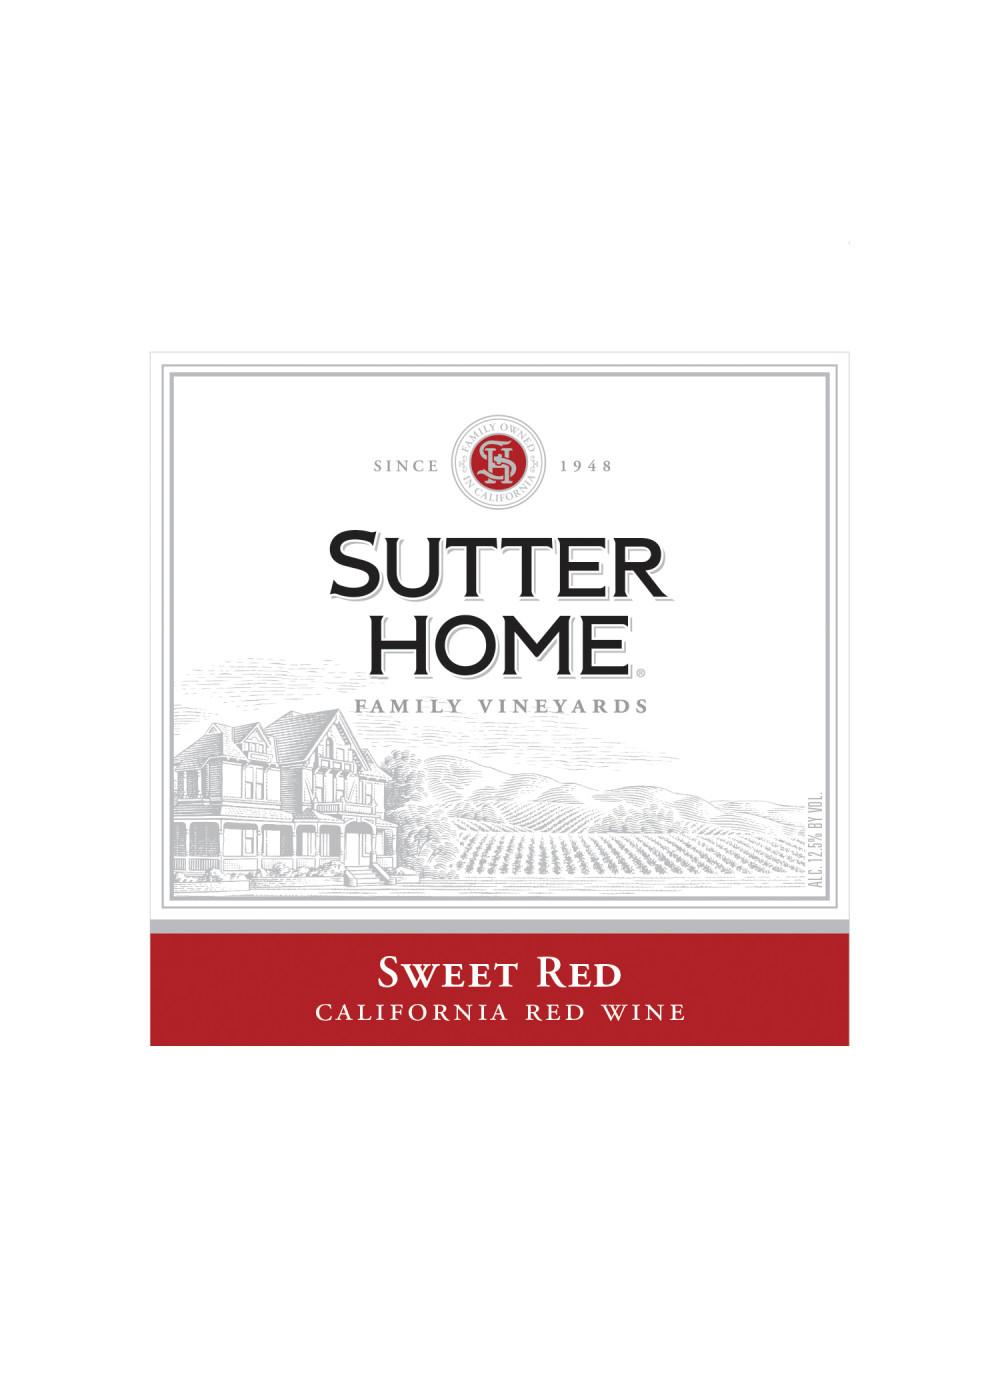 Sutter Home Family Vineyards Sweet Red Wine; image 2 of 5